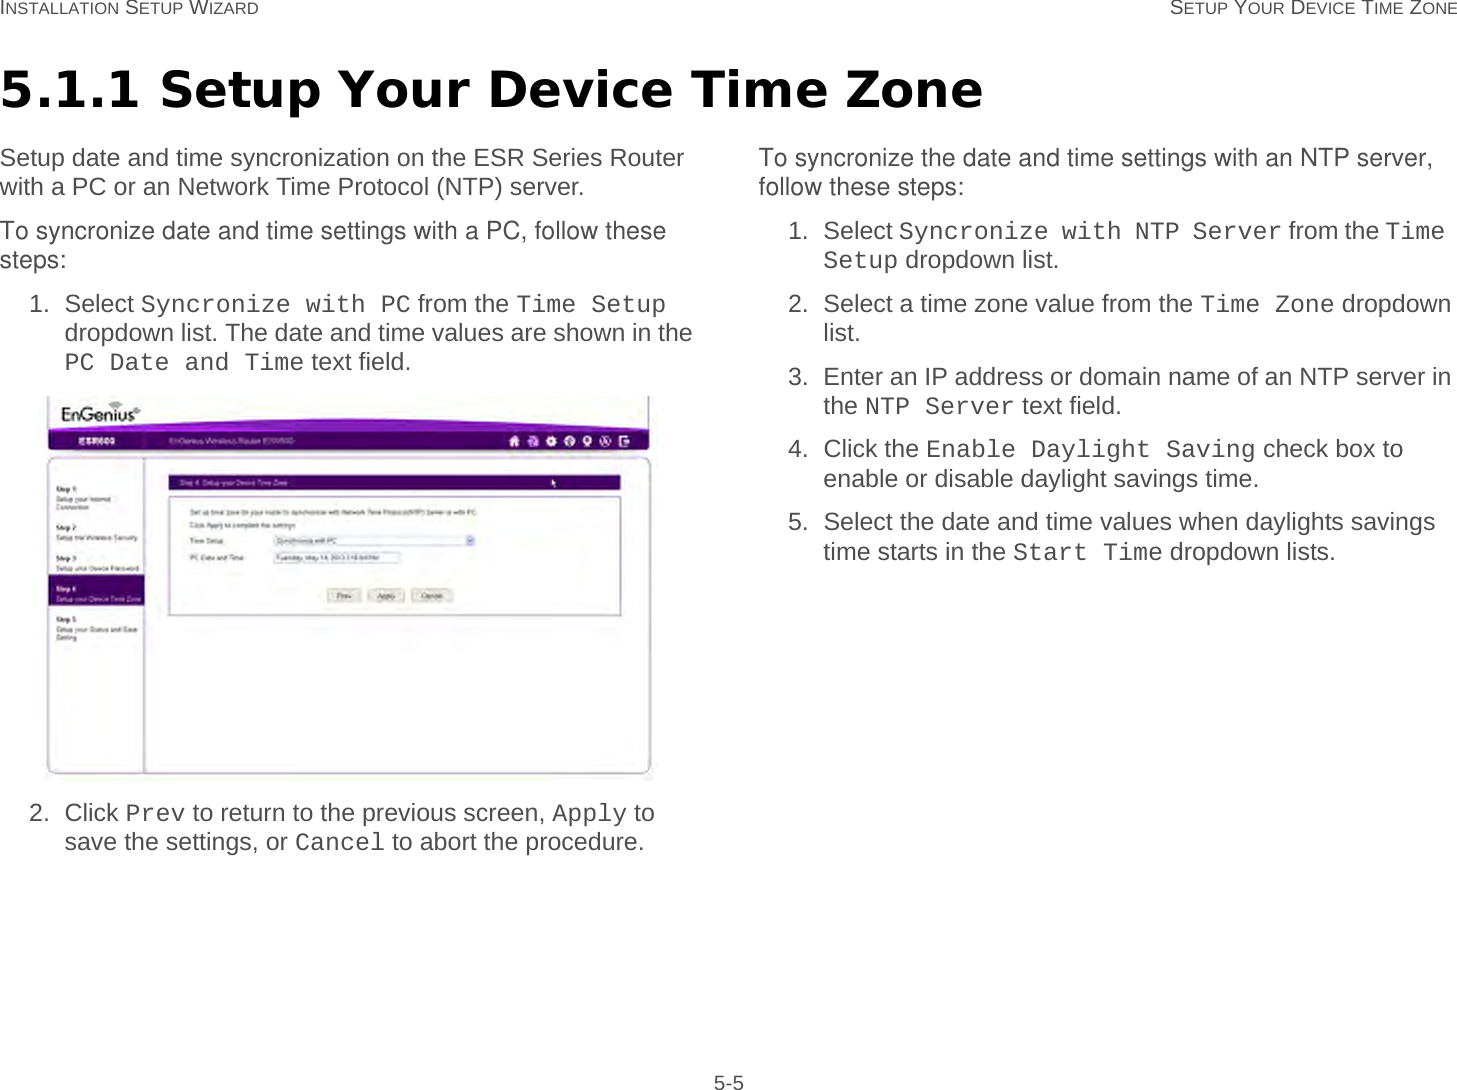 INSTALLATION SETUP WIZARD SETUP YOUR DEVICE TIME ZONE 5-55.1.1 Setup Your Device Time ZoneSetup date and time syncronization on the ESR Series Router with a PC or an Network Time Protocol (NTP) server.To syncronize date and time settings with a PC, follow these steps:1. Select Syncronize with PC from the Time Setup dropdown list. The date and time values are shown in the PC Date and Time text field.2. Click Prev to return to the previous screen, Apply to save the settings, or Cancel to abort the procedure.To syncronize the date and time settings with an NTP server, follow these steps:1. Select Syncronize with NTP Server from the Time Setup dropdown list.2. Select a time zone value from the Time Zone dropdown list.3. Enter an IP address or domain name of an NTP server in the NTP Server text field.4. Click the Enable Daylight Saving check box to enable or disable daylight savings time.5. Select the date and time values when daylights savings time starts in the Start Time dropdown lists.